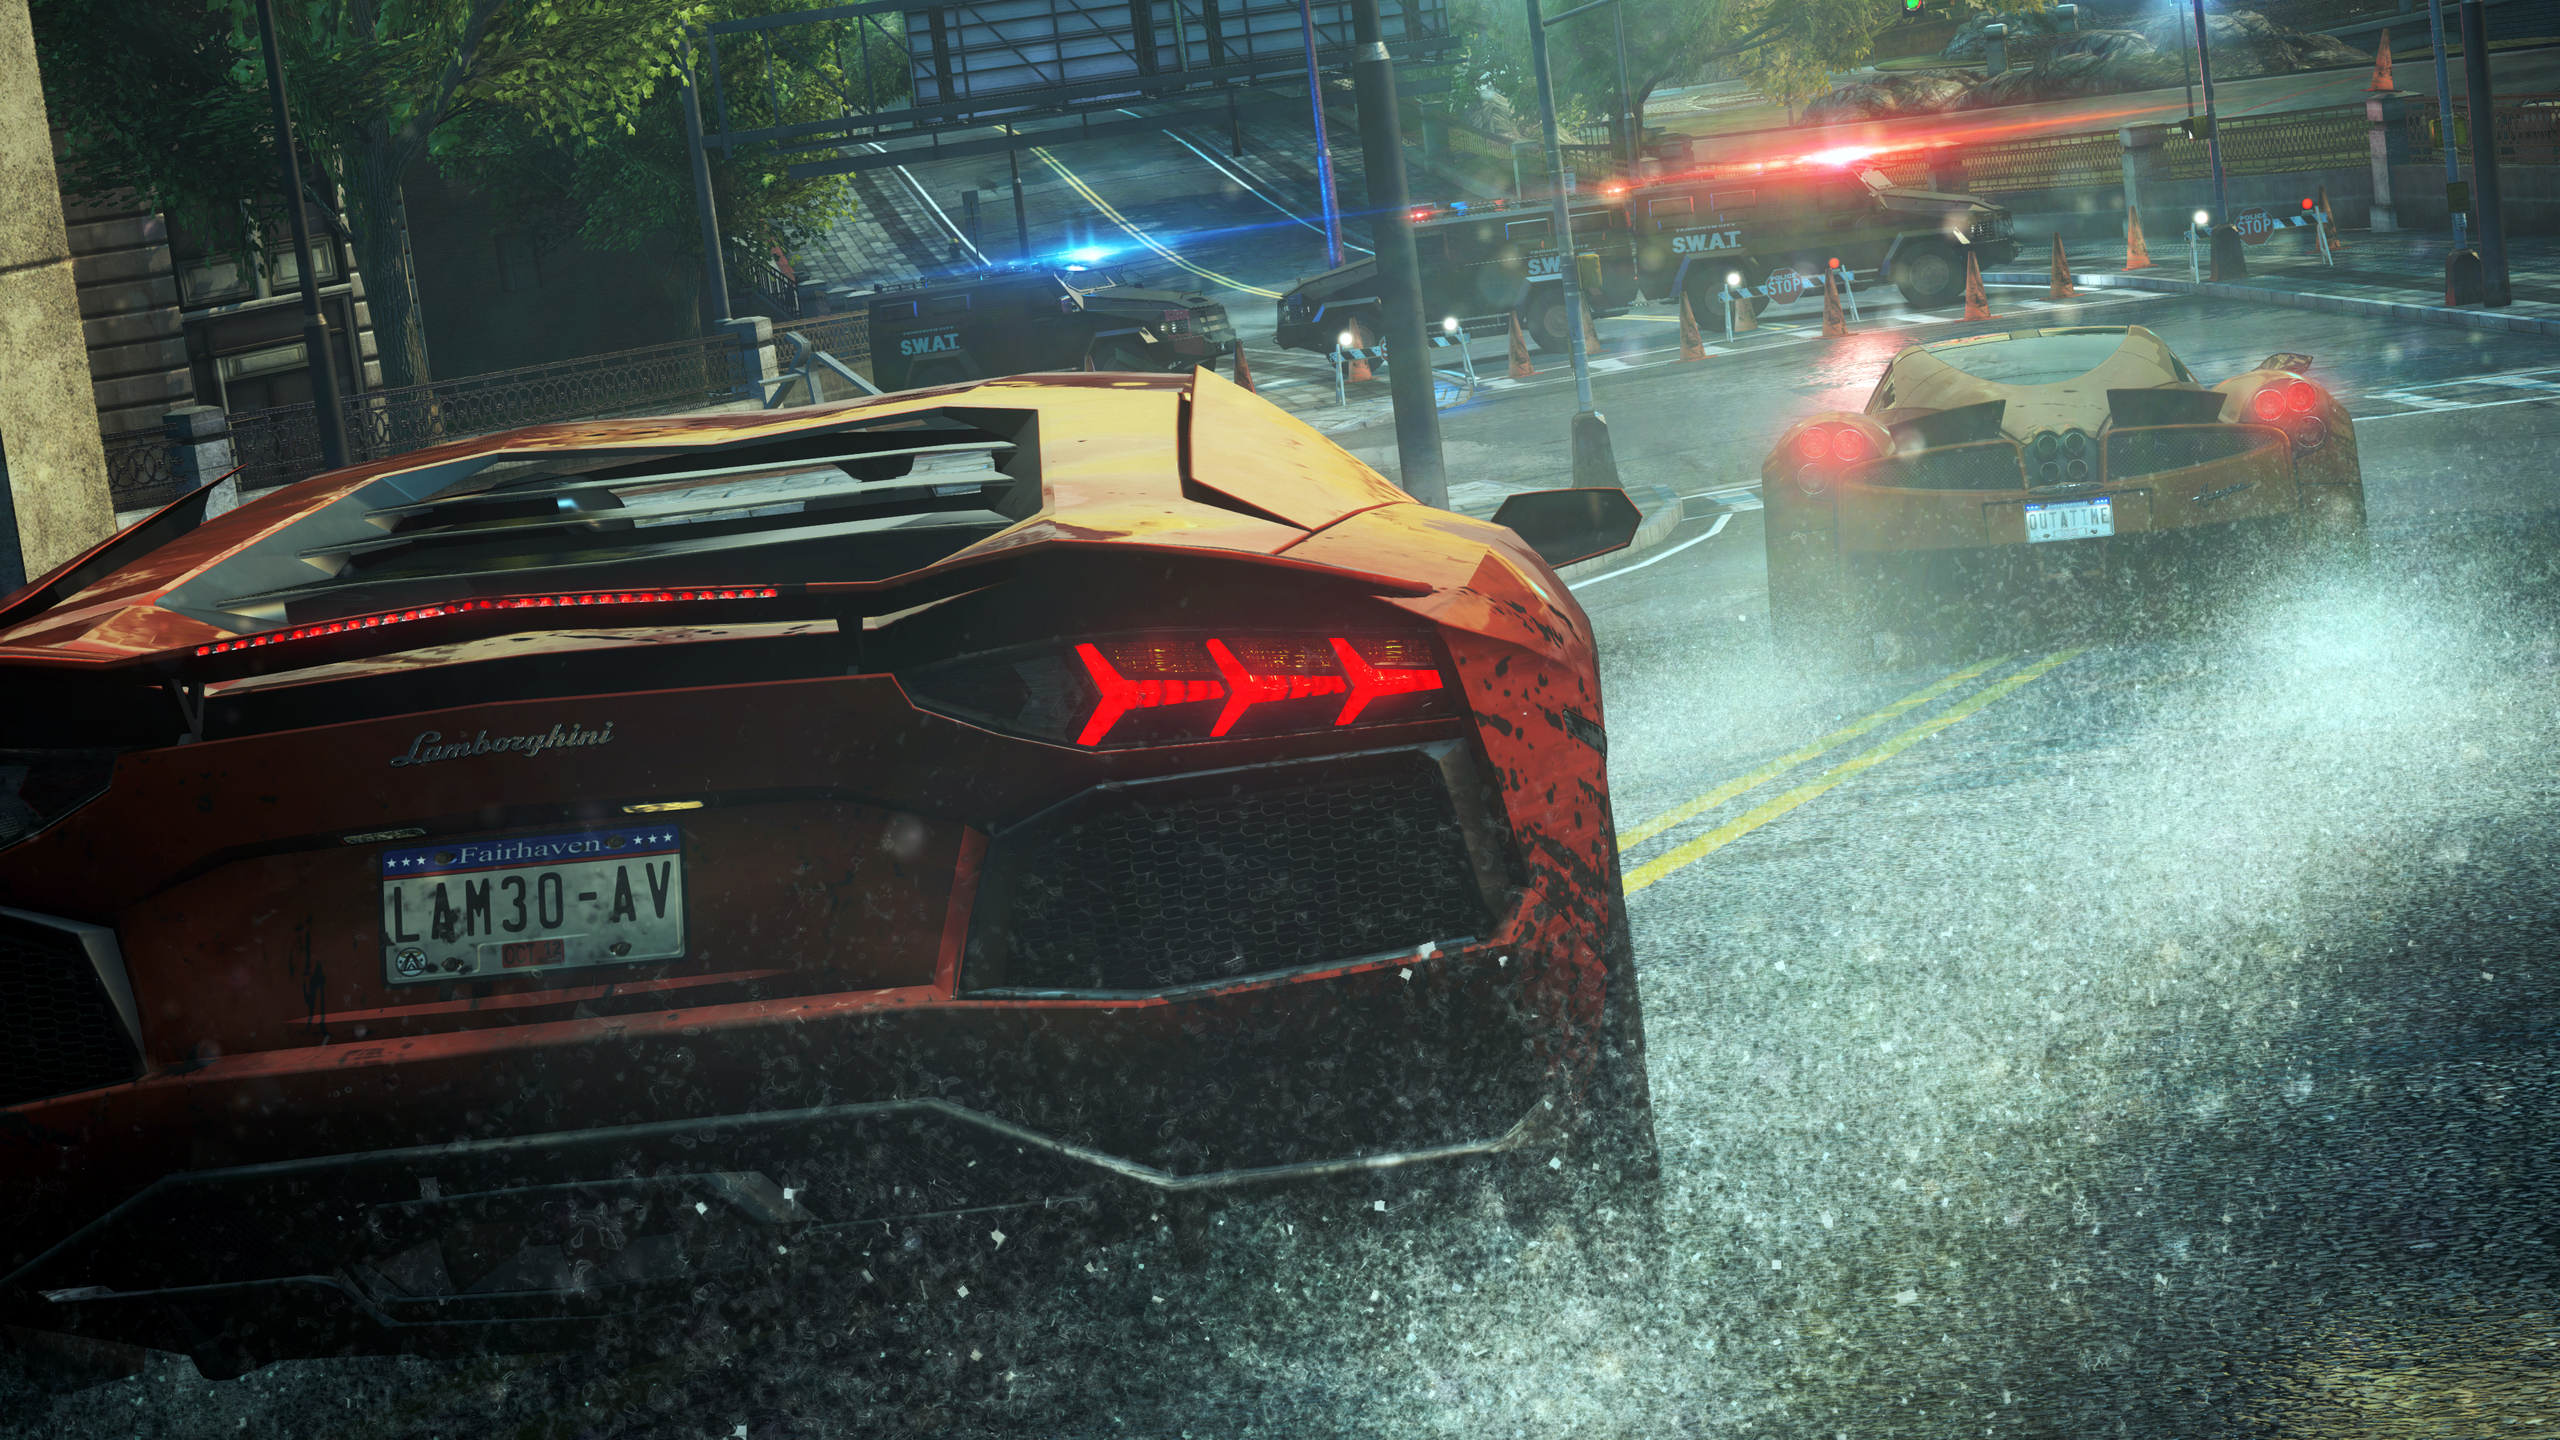 2560x1440 Download wallpaper rain, race, police, Lamborghini, cars, Need For Speed Most Wanted, cars, section games in resoluti